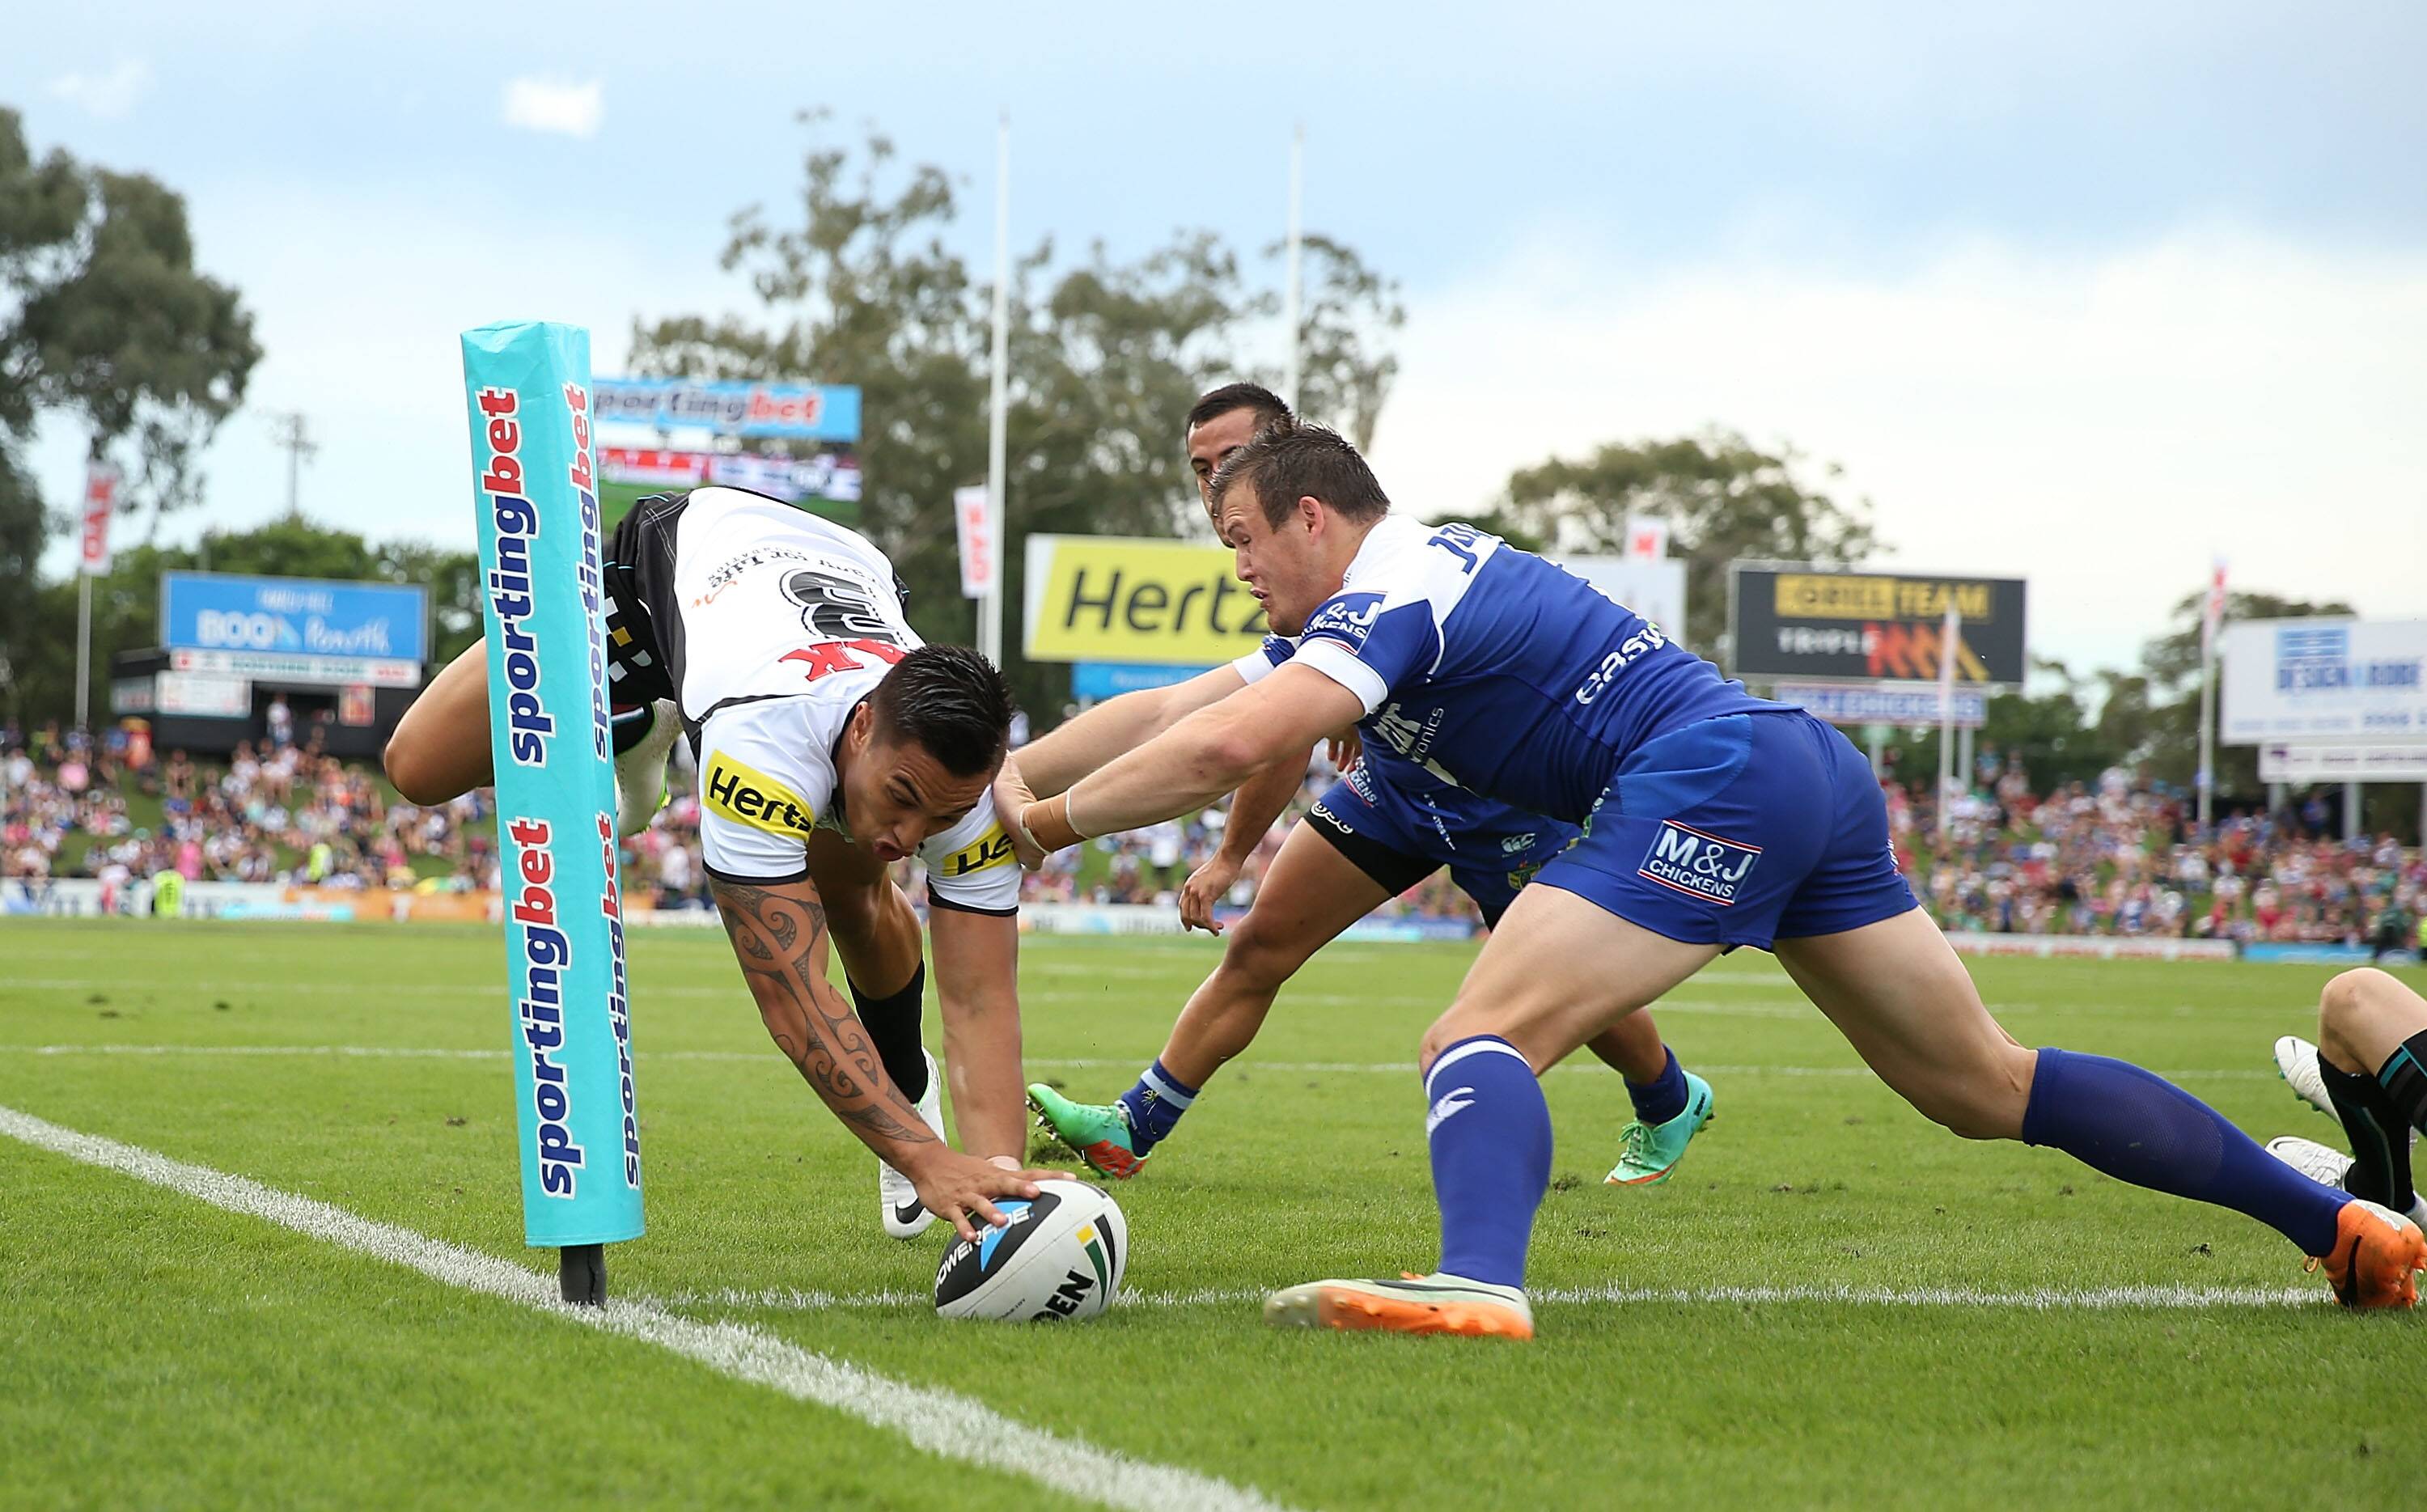 Penrith Panthers V Canberra Raiders Saturday, 5.30pm St George and Sutherland Shire Leader St George, NSW